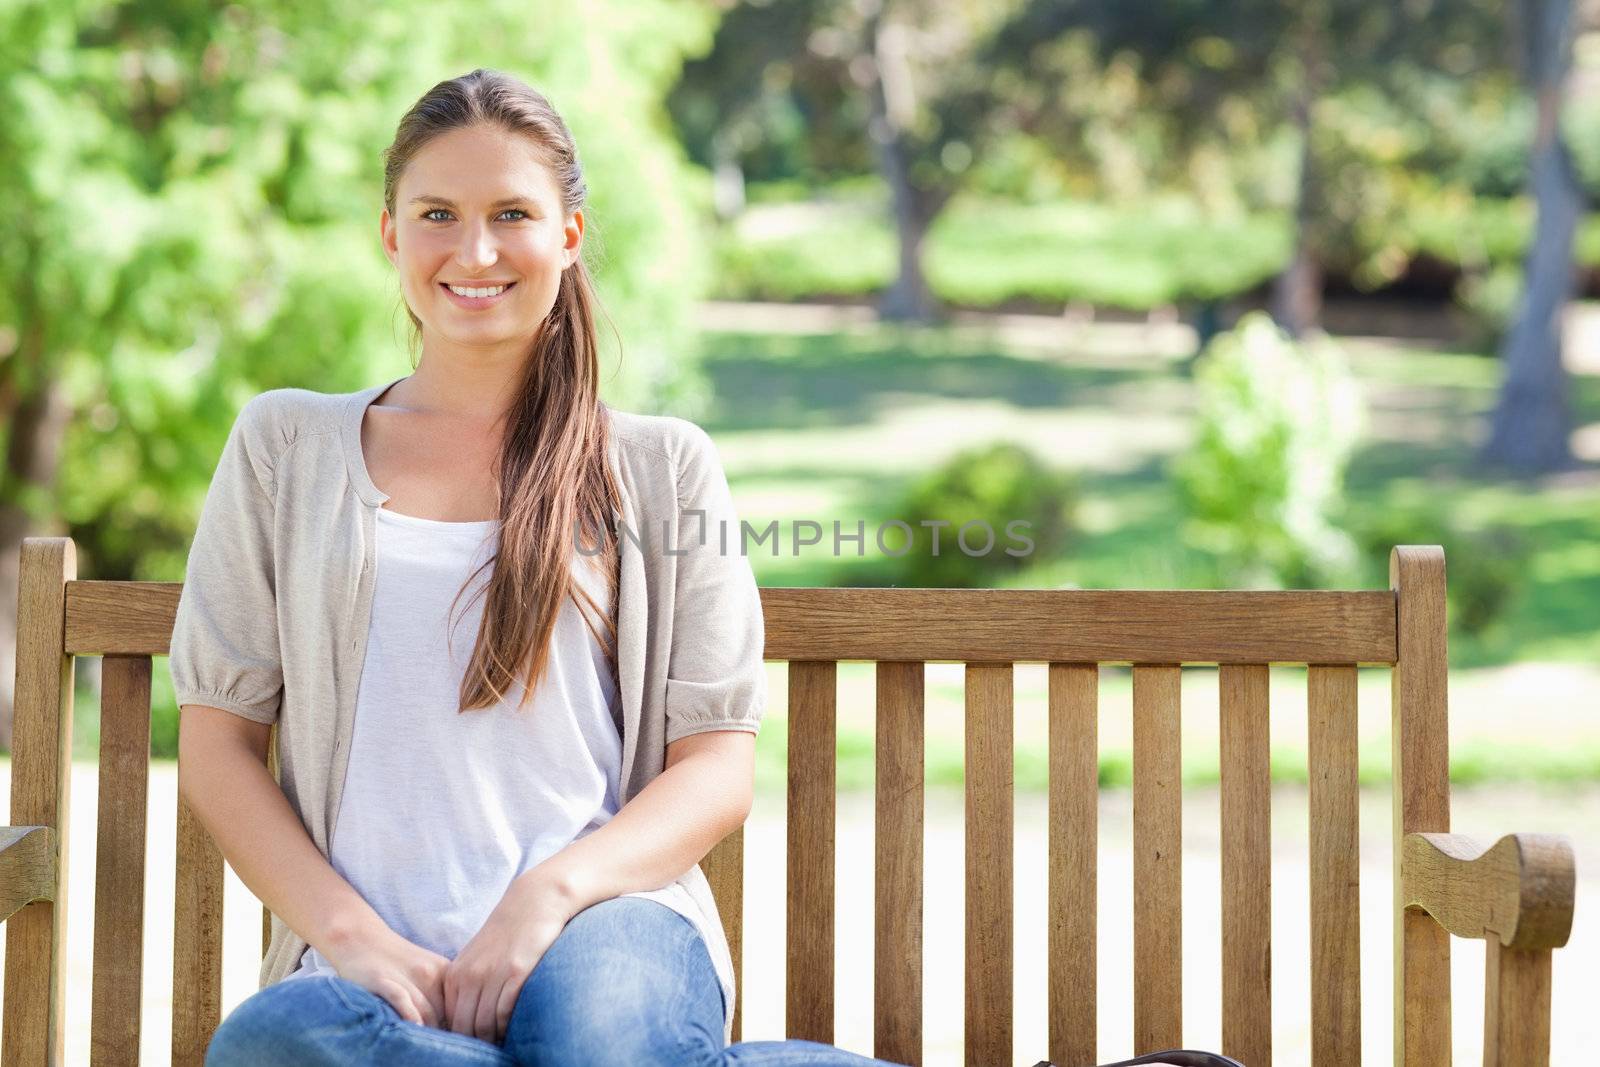 Smiling woman relaxing in the park on a bench by Wavebreakmedia